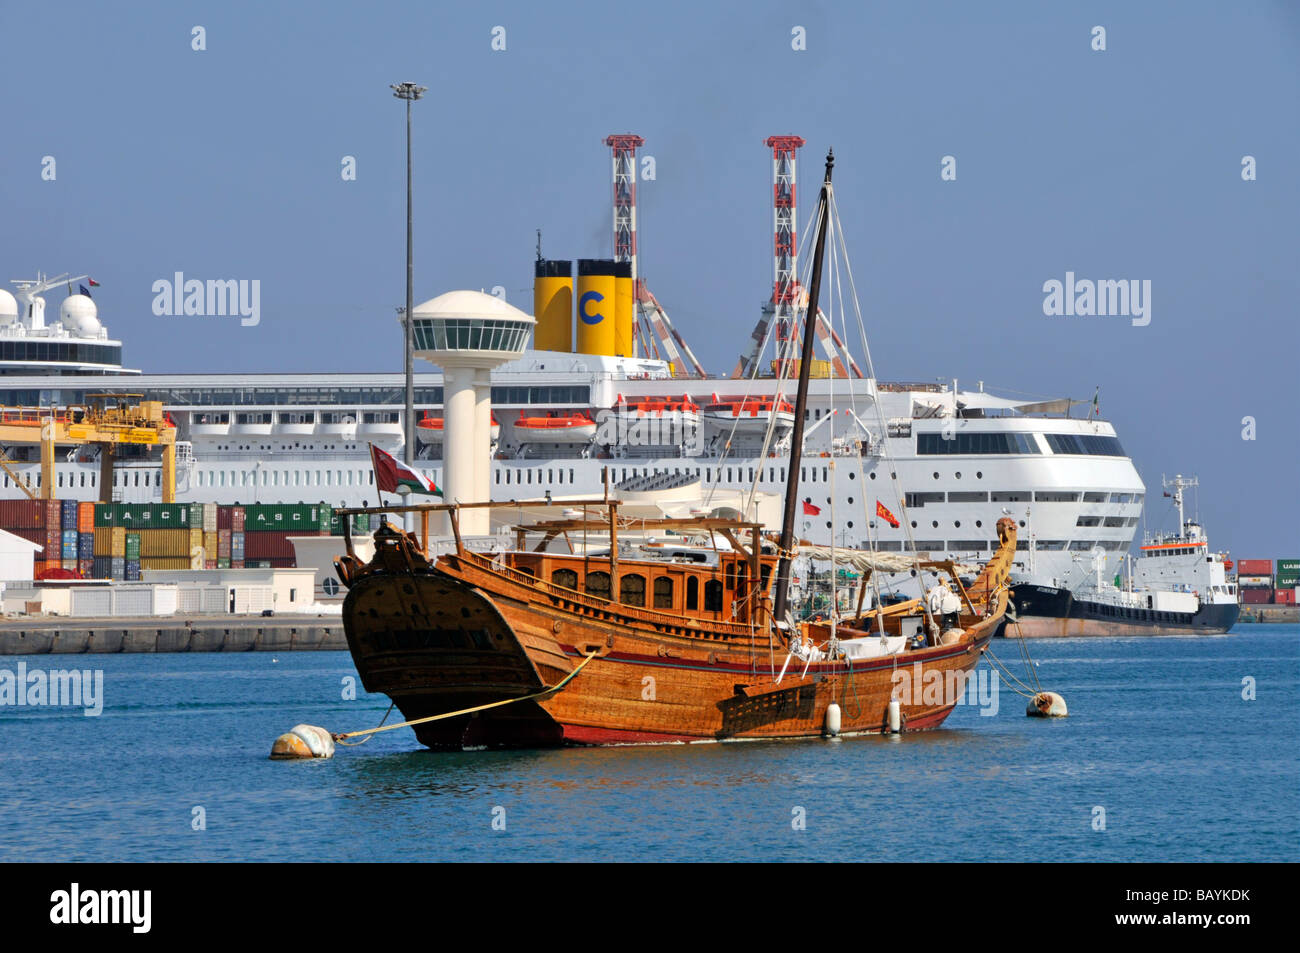 Muscat Oman Dhow moored in Muttrah harbour Costa Classica cruise ship tourism liner docked in Port Sultan Qaboos in Gulf of Oman Middle East Asia Stock Photo